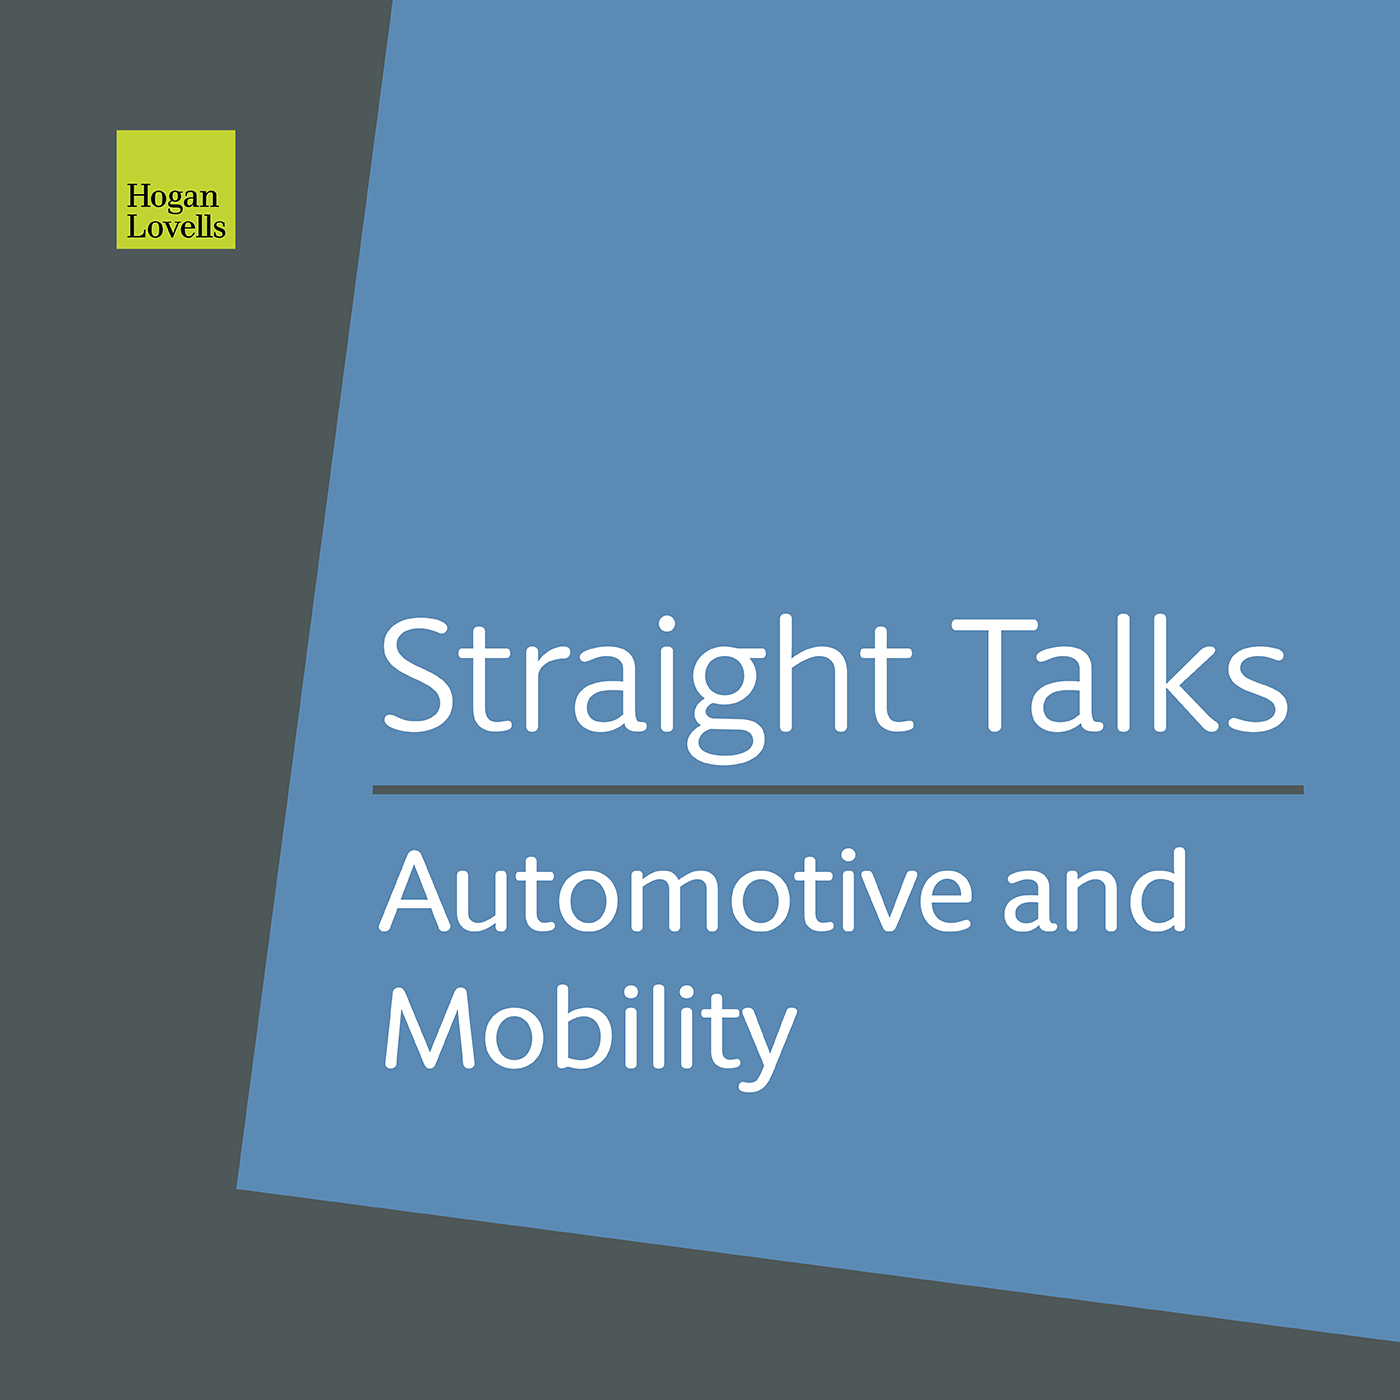 Straight Talks: New players, new rules - IP disruption in the automobile industry